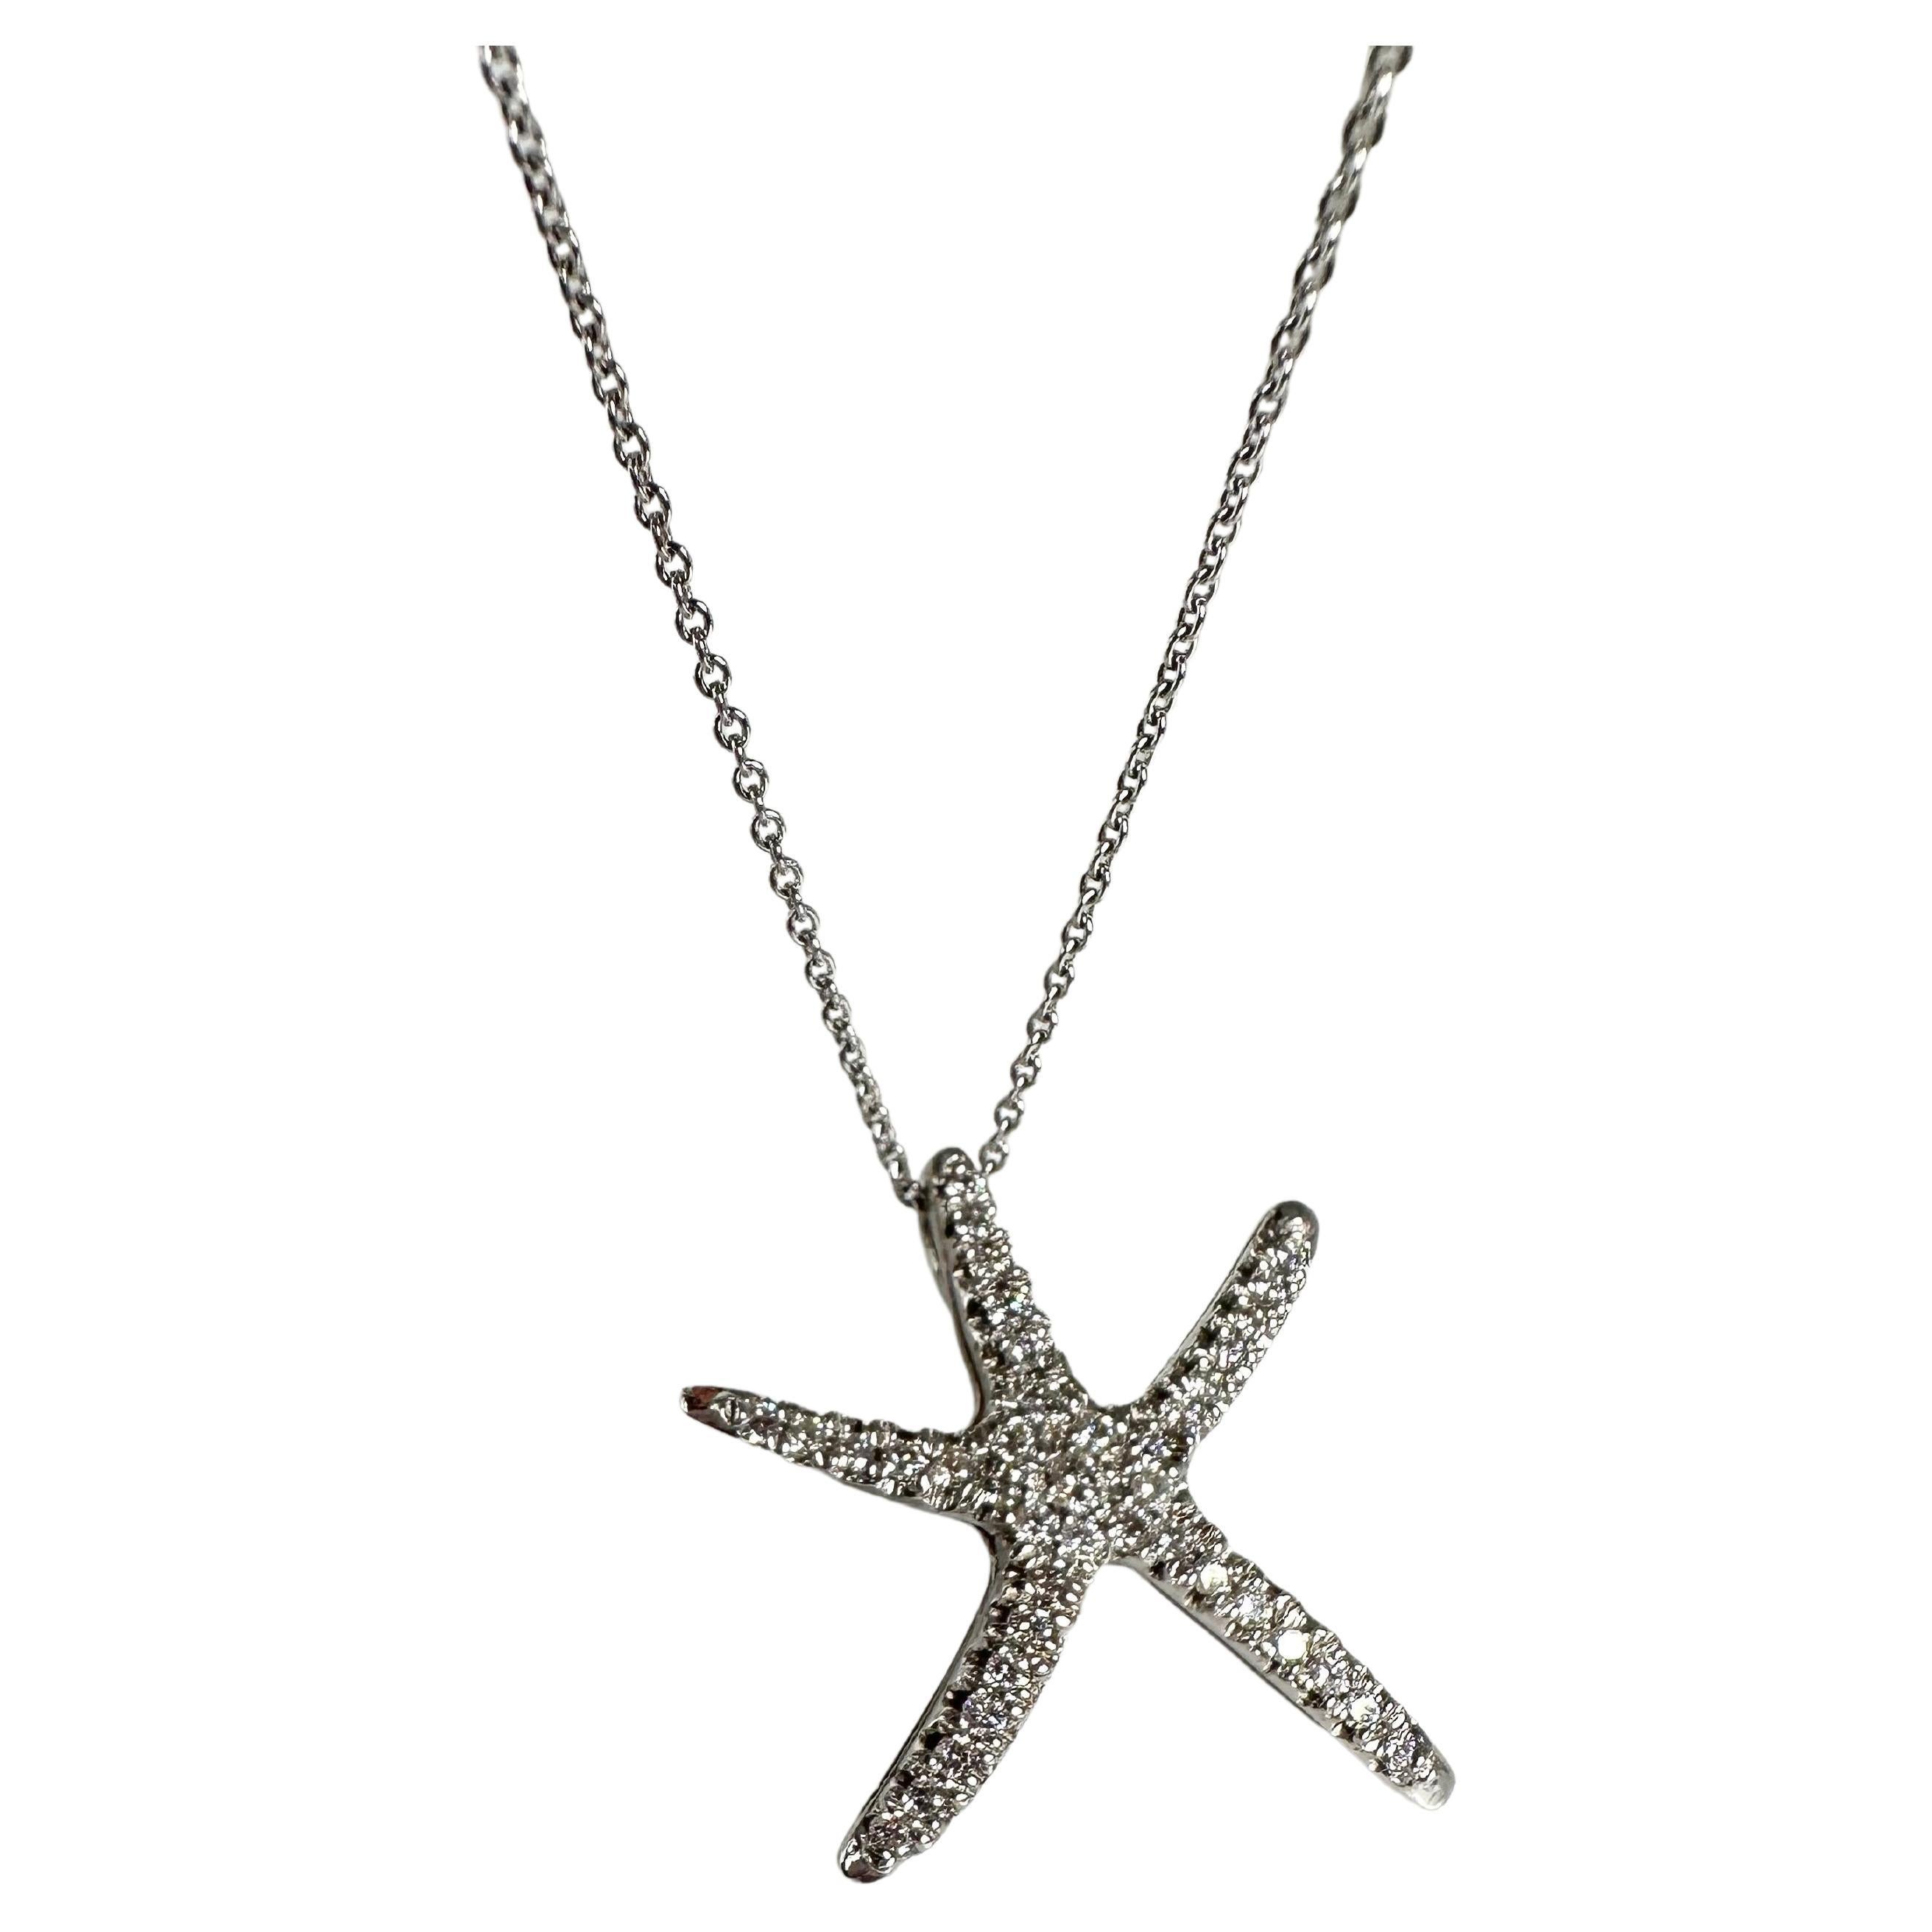 Diamond starfish pendant necklace 14KT white gold well crafted necklace For Sale